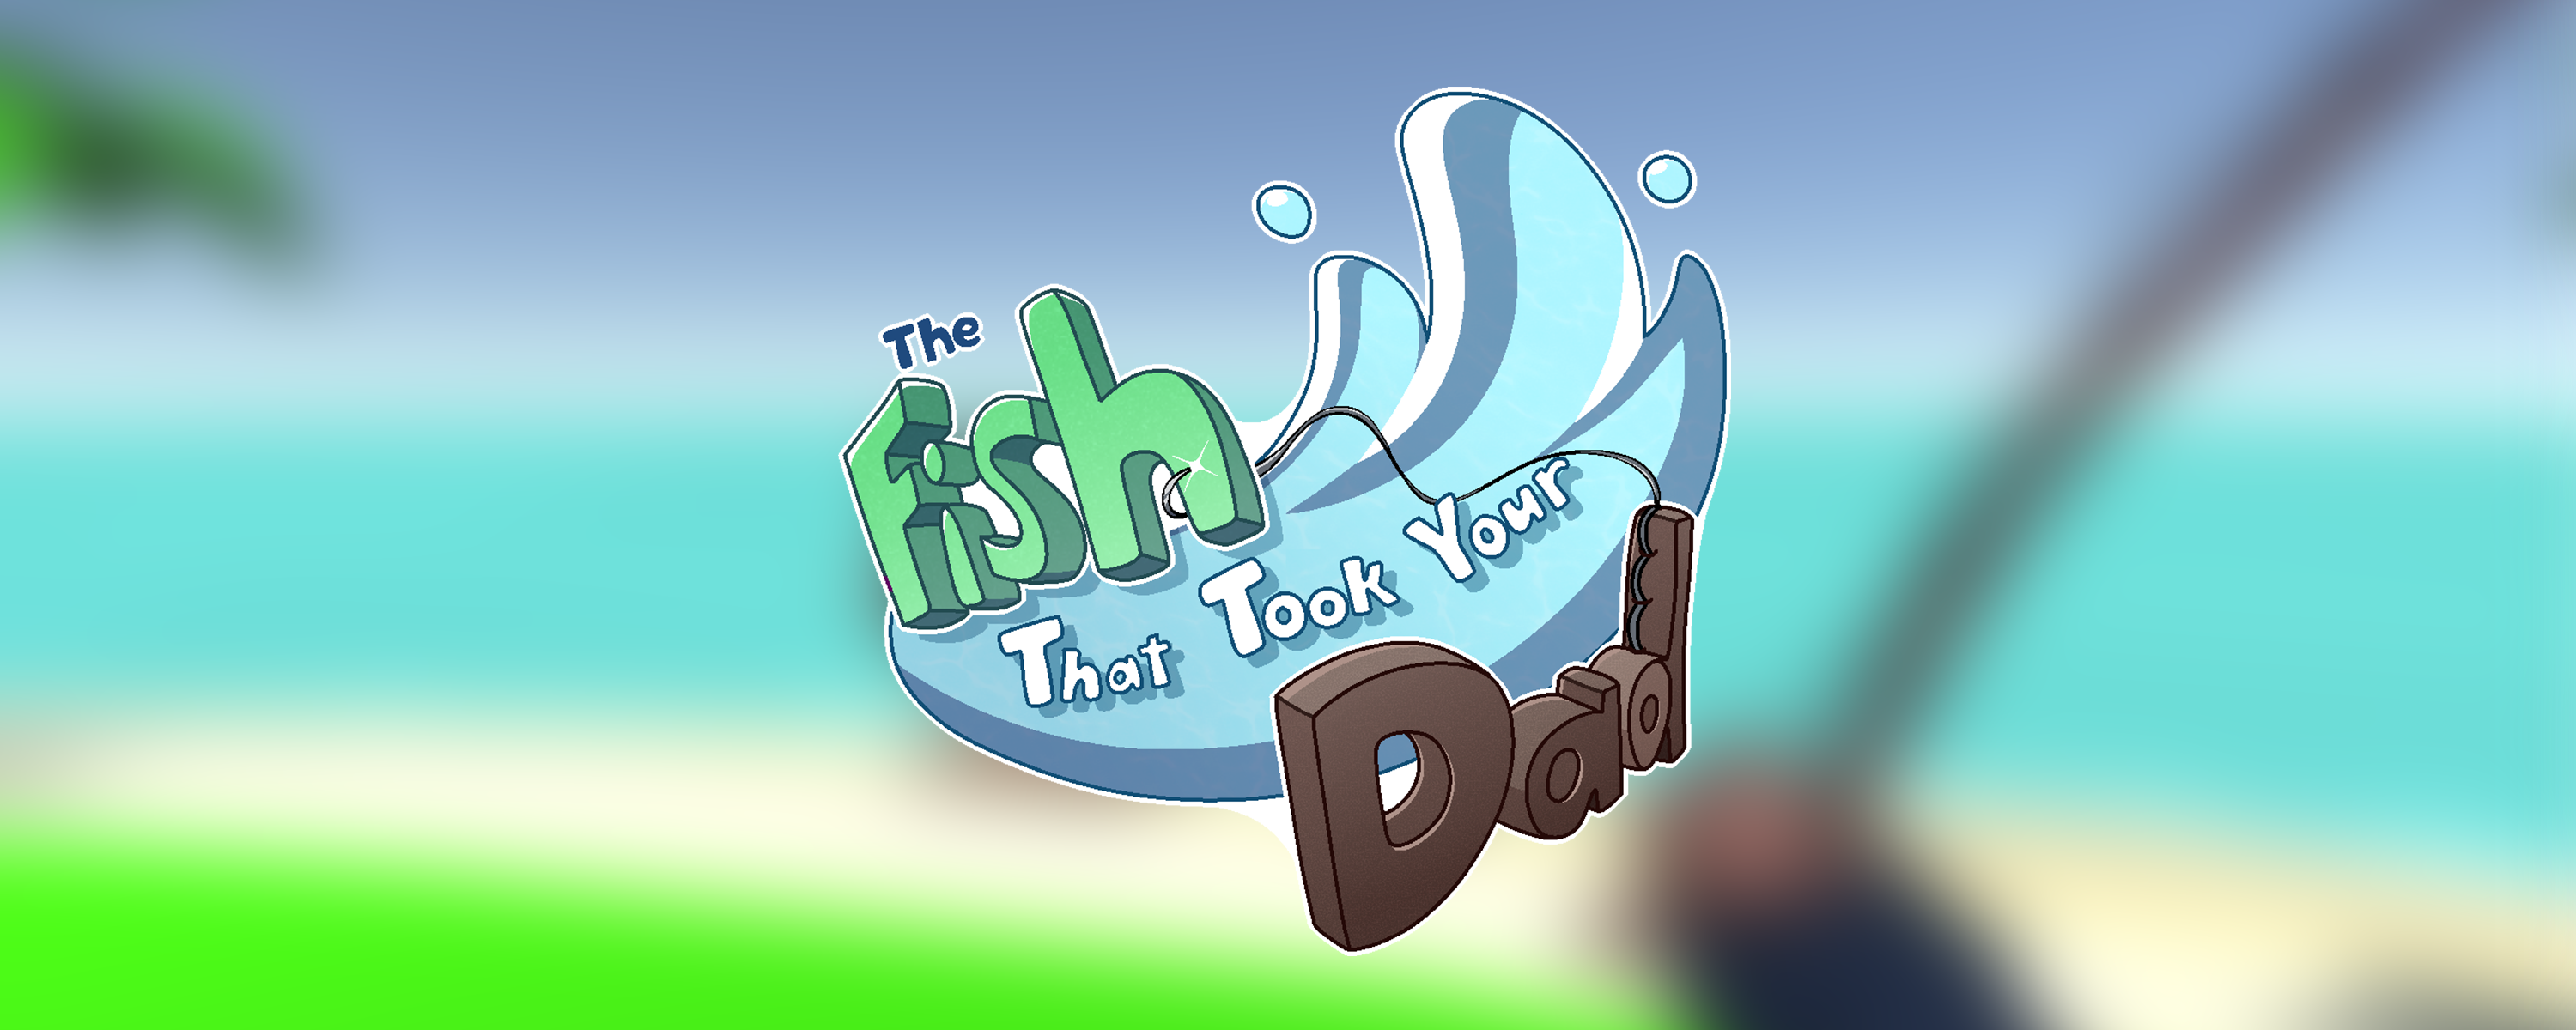 The Fish That Took Your Dad